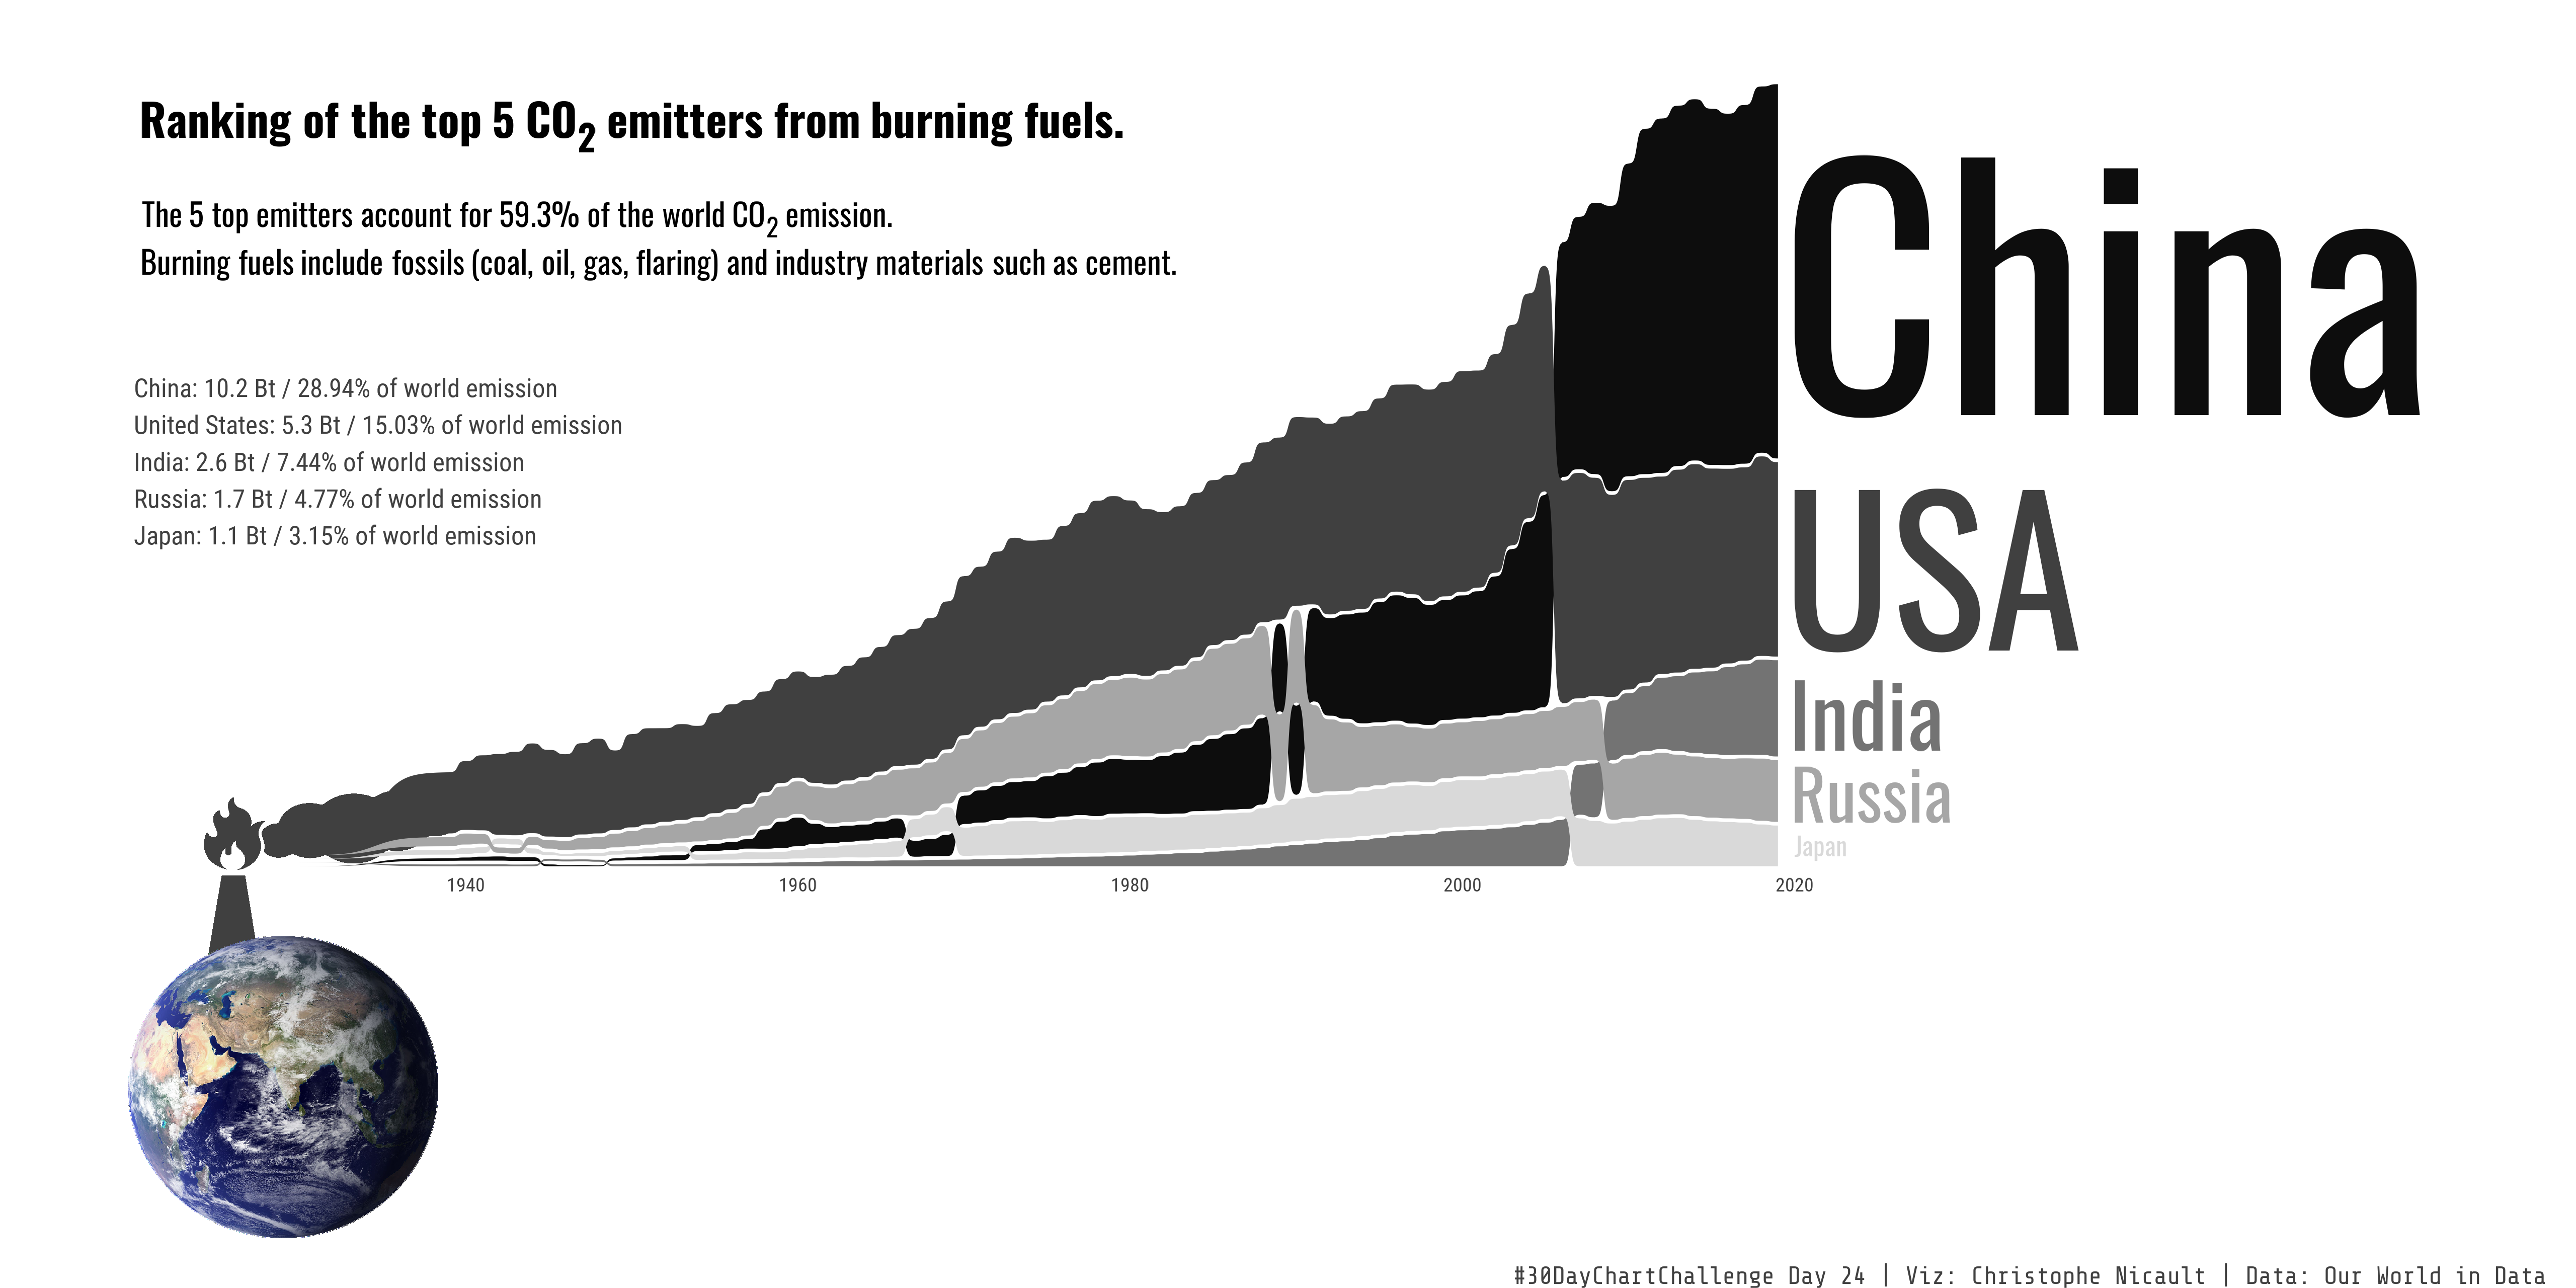 Ranking of the top 5 CO2 emitters from burning fuels